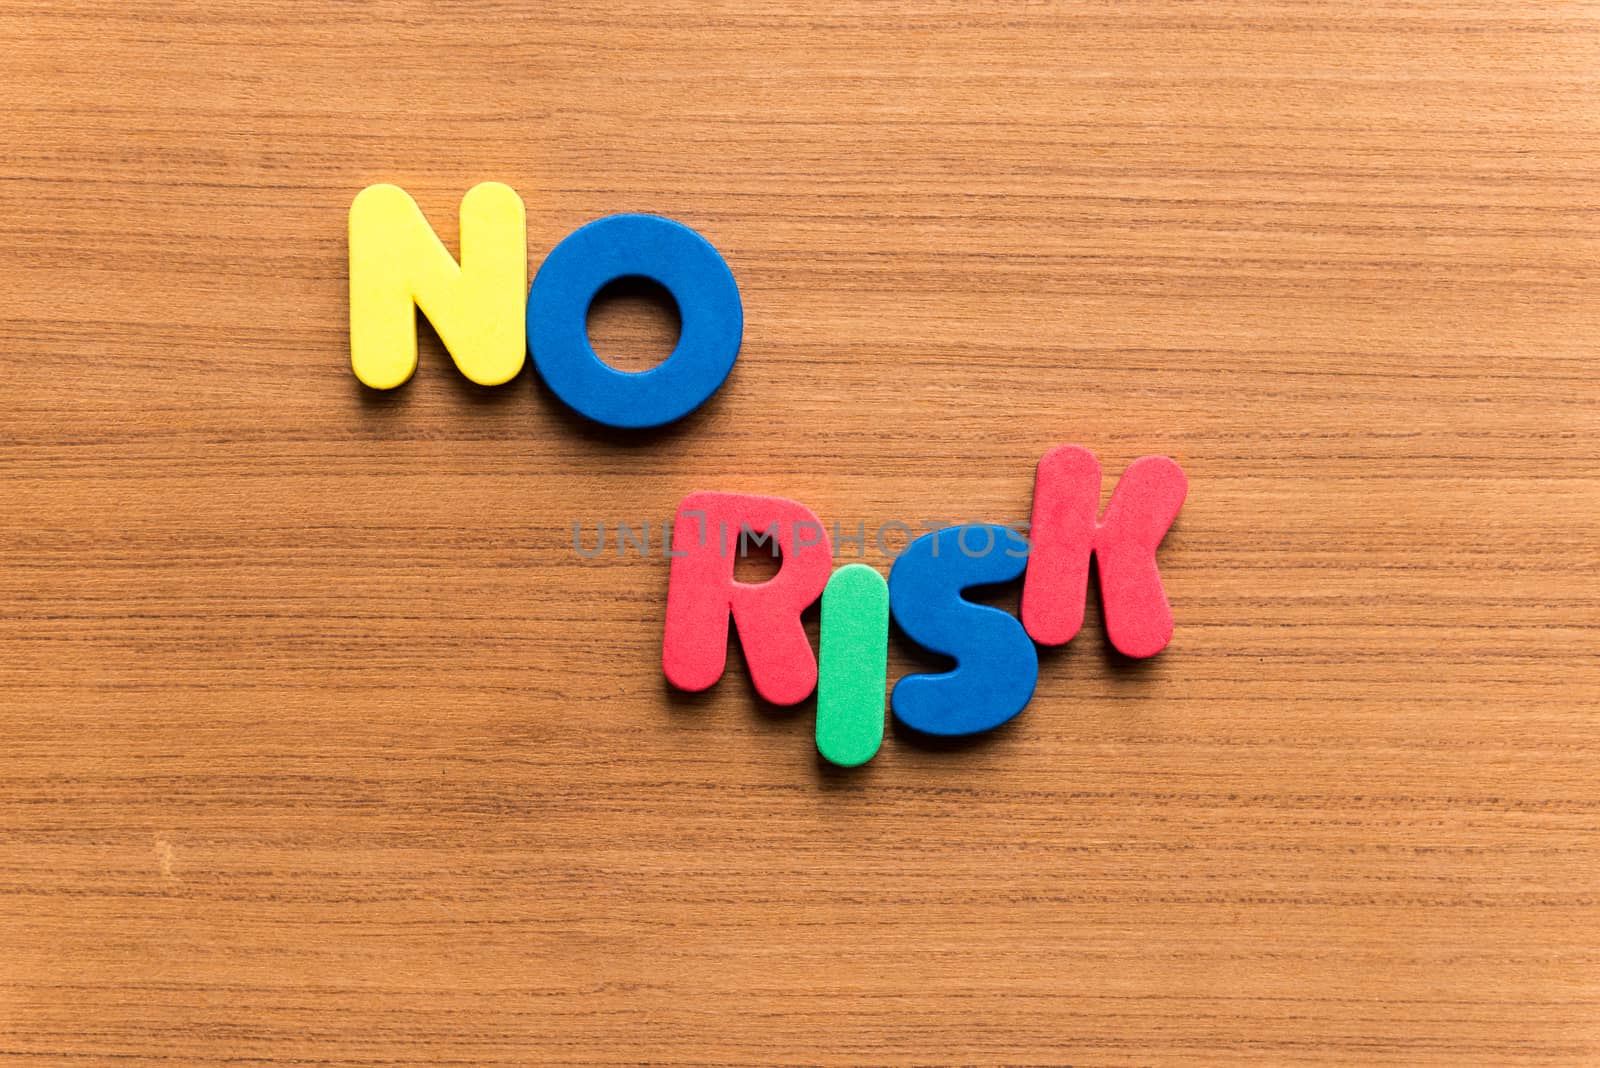 no risk colorful word on the wooden background